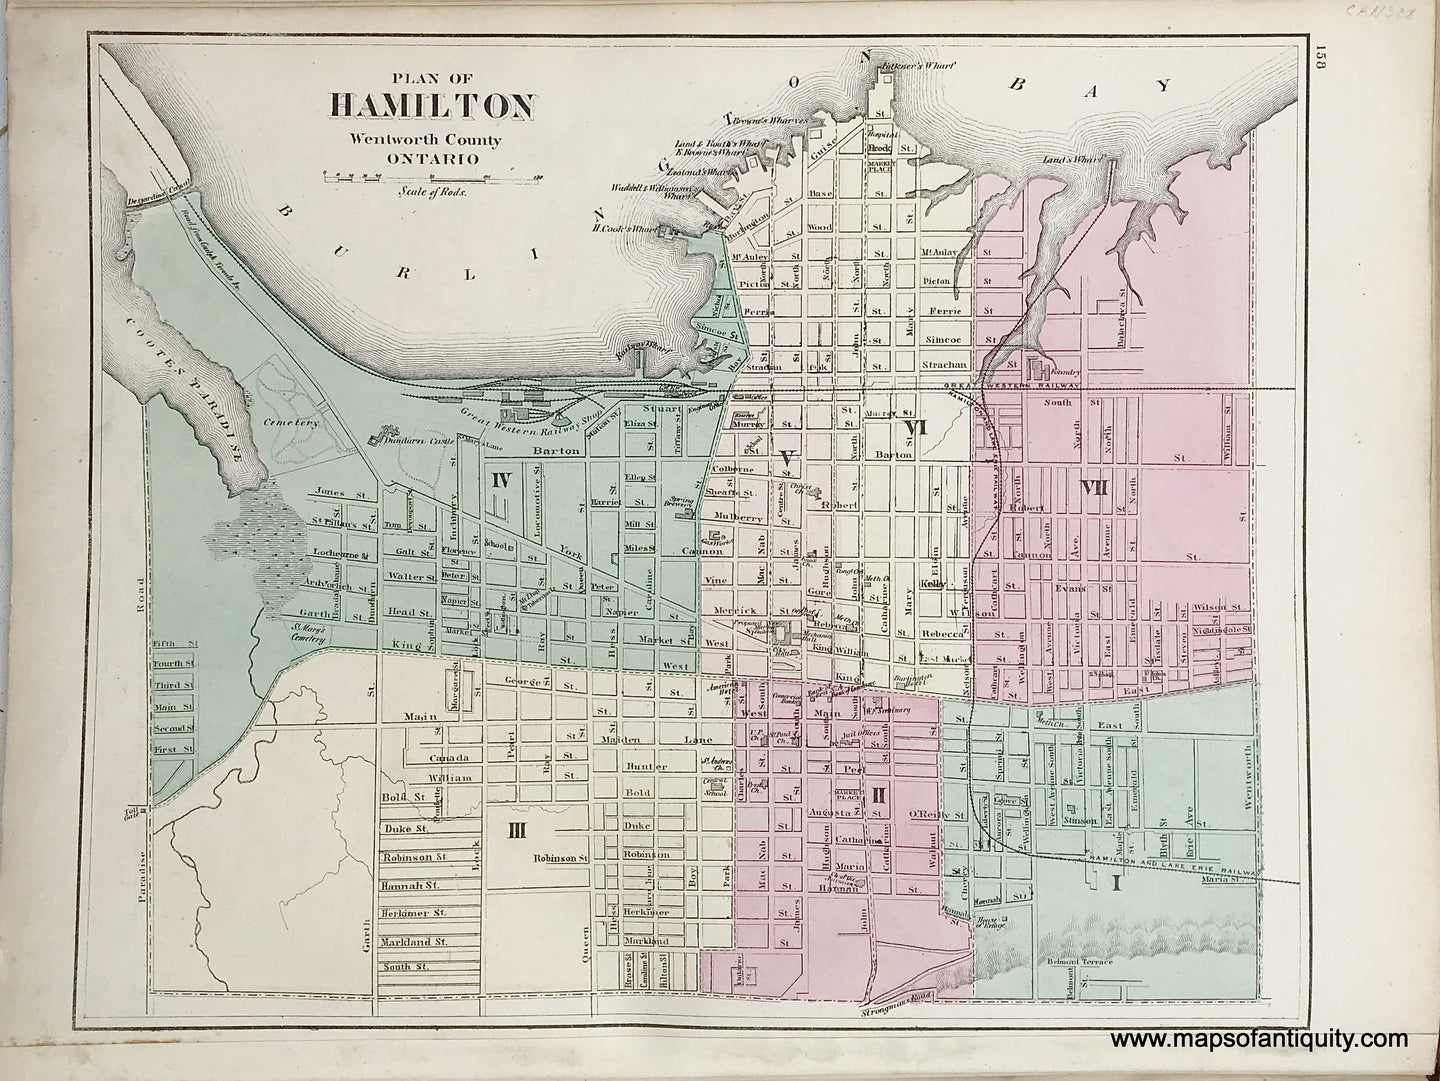 Antique-Map-Sheet-with-two-maps:-Counties-of-Dundas-Russell-Prescott-Stormont-and-Glengary-/-Plan-of-Hamilton-Wentworth-County-Ontario-1875-Walling-/-Tackabury-Canada-Civil-War-1800s-19th-century-Maps-of-Antiquity